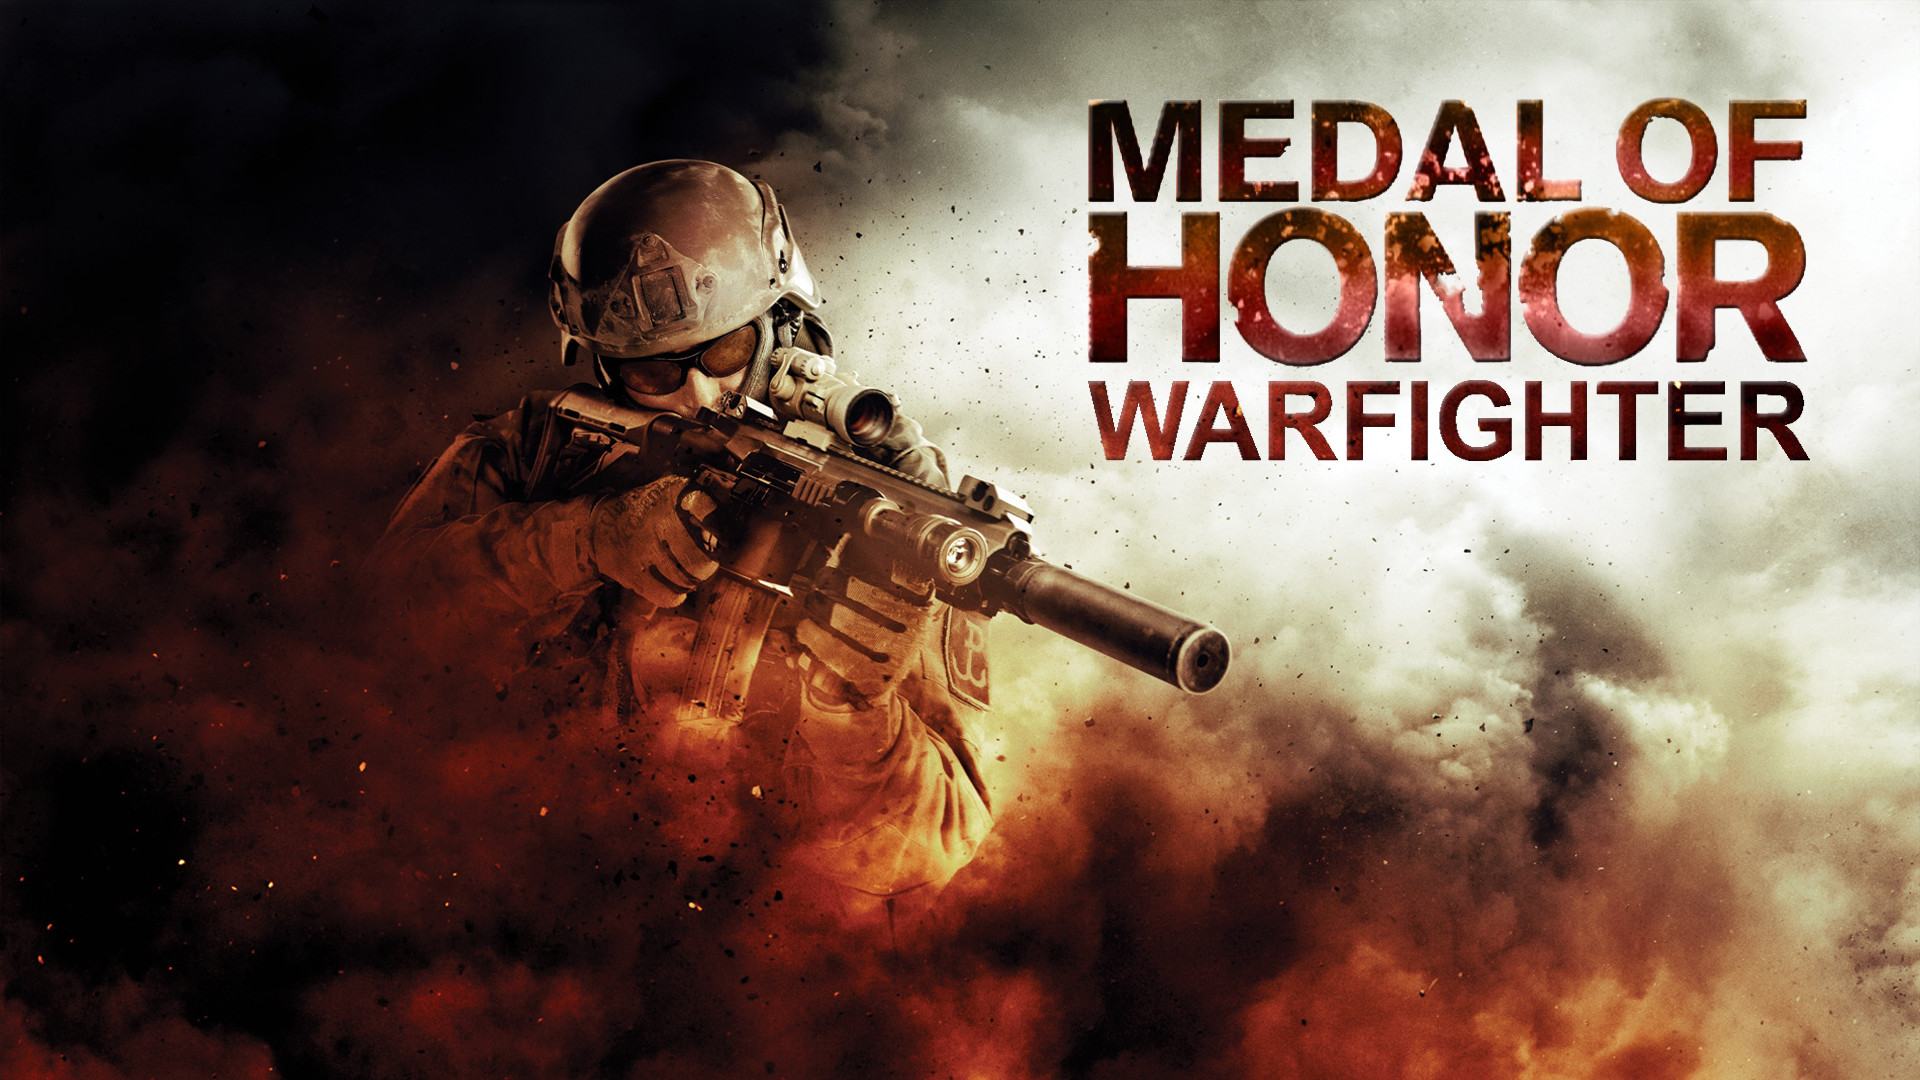 1920x1080 medal of honor warfighter game. Â«Â«